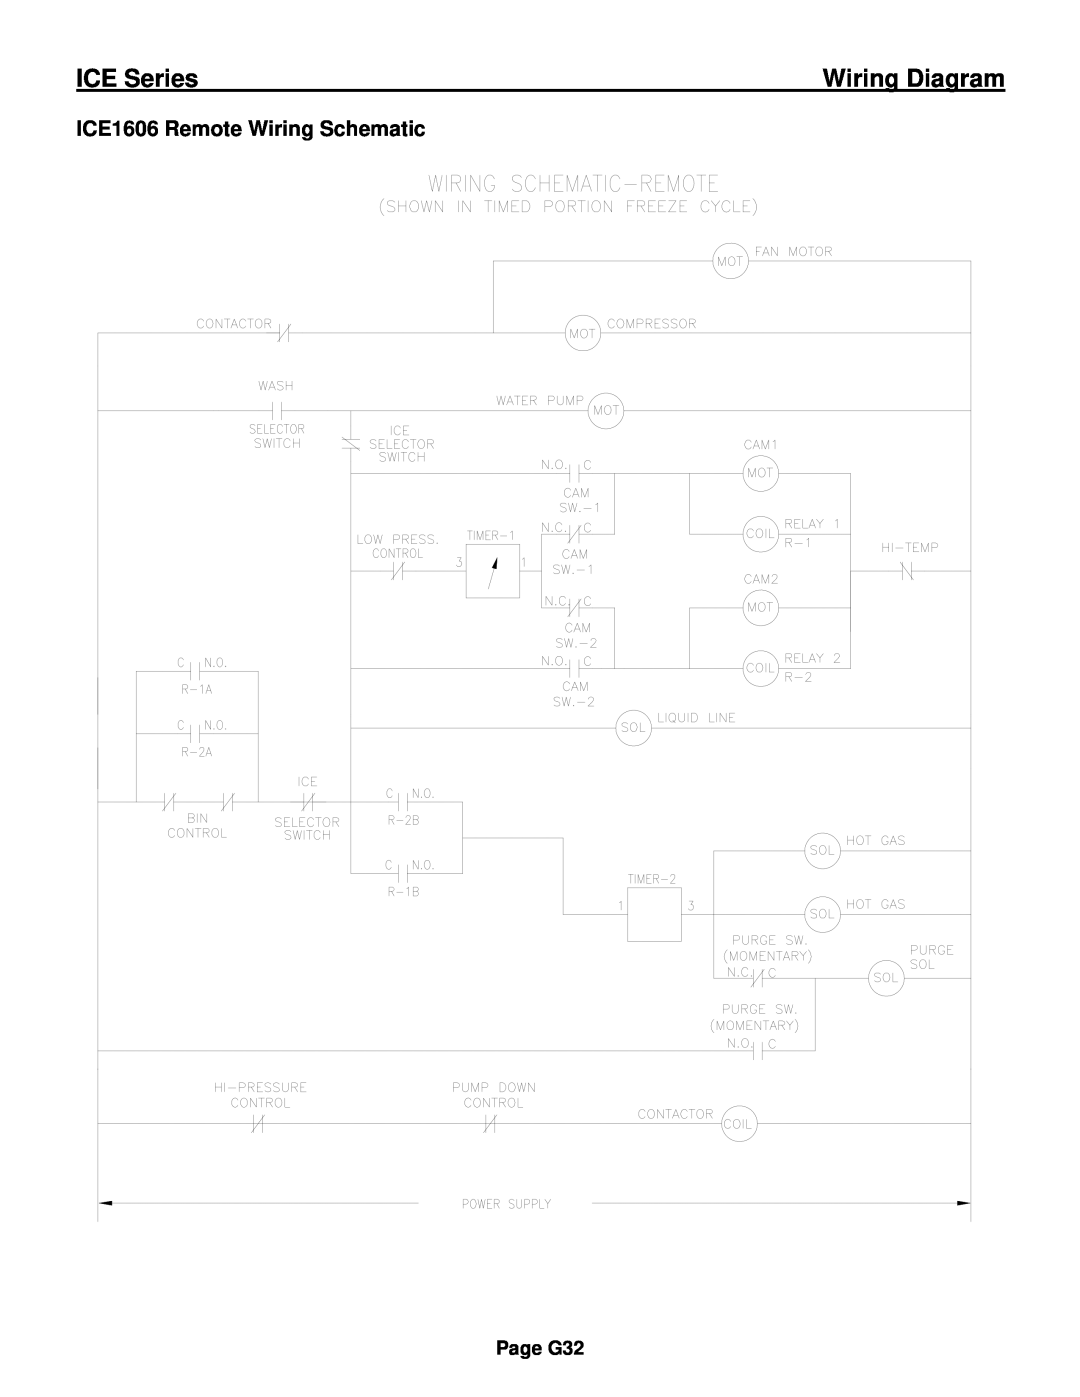 Ice-O-Matic ICE0250 Series installation manual ICE1606 Remote Wiring Schematic, ICE Series, Wiring Diagram, Page G32 